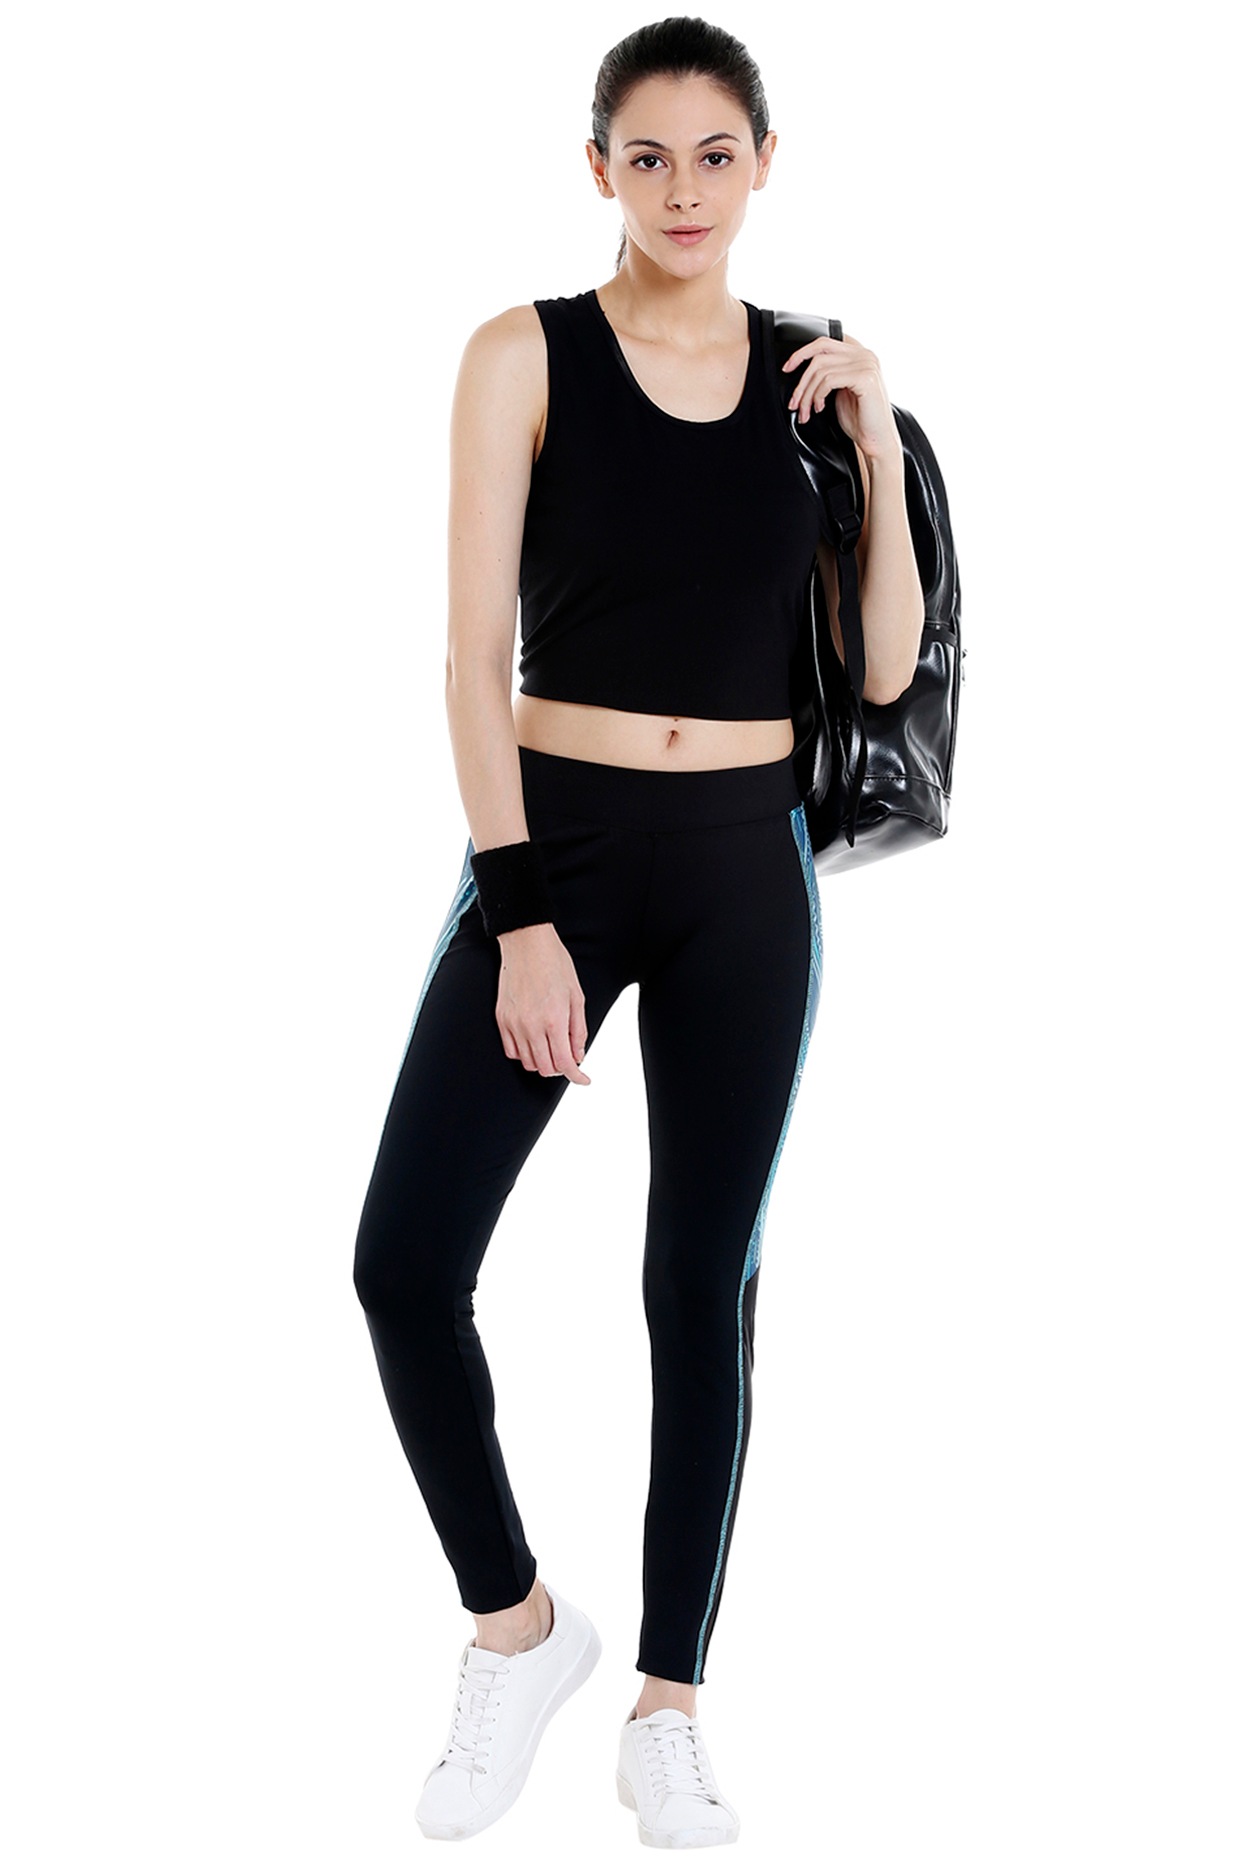 Black Mid Waist Ndless Sports Polyester & Lycra Yoga Pant/Legging For  Women, Casual Wear, Slim Fit at Rs 499 in New Delhi